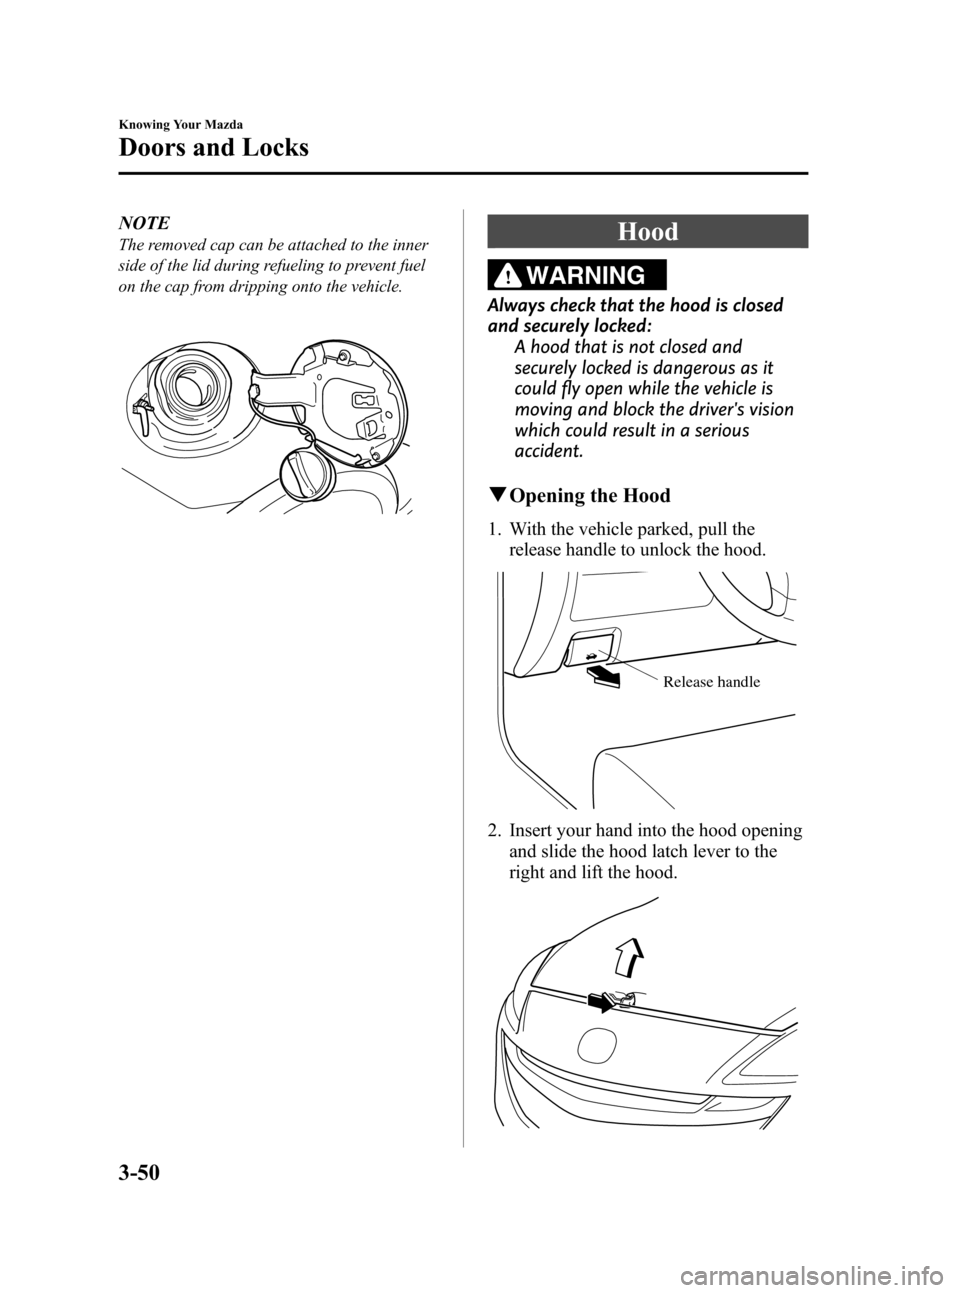 MAZDA MODEL 3 HATCHBACK 2010  Owners Manual (in English) Black plate (126,1)
NOTE
The removed cap can be attached to the inner
side of the lid during refueling to prevent fuel
on the cap from dripping onto the vehicle.Hood
WARNING
Always check that the hood